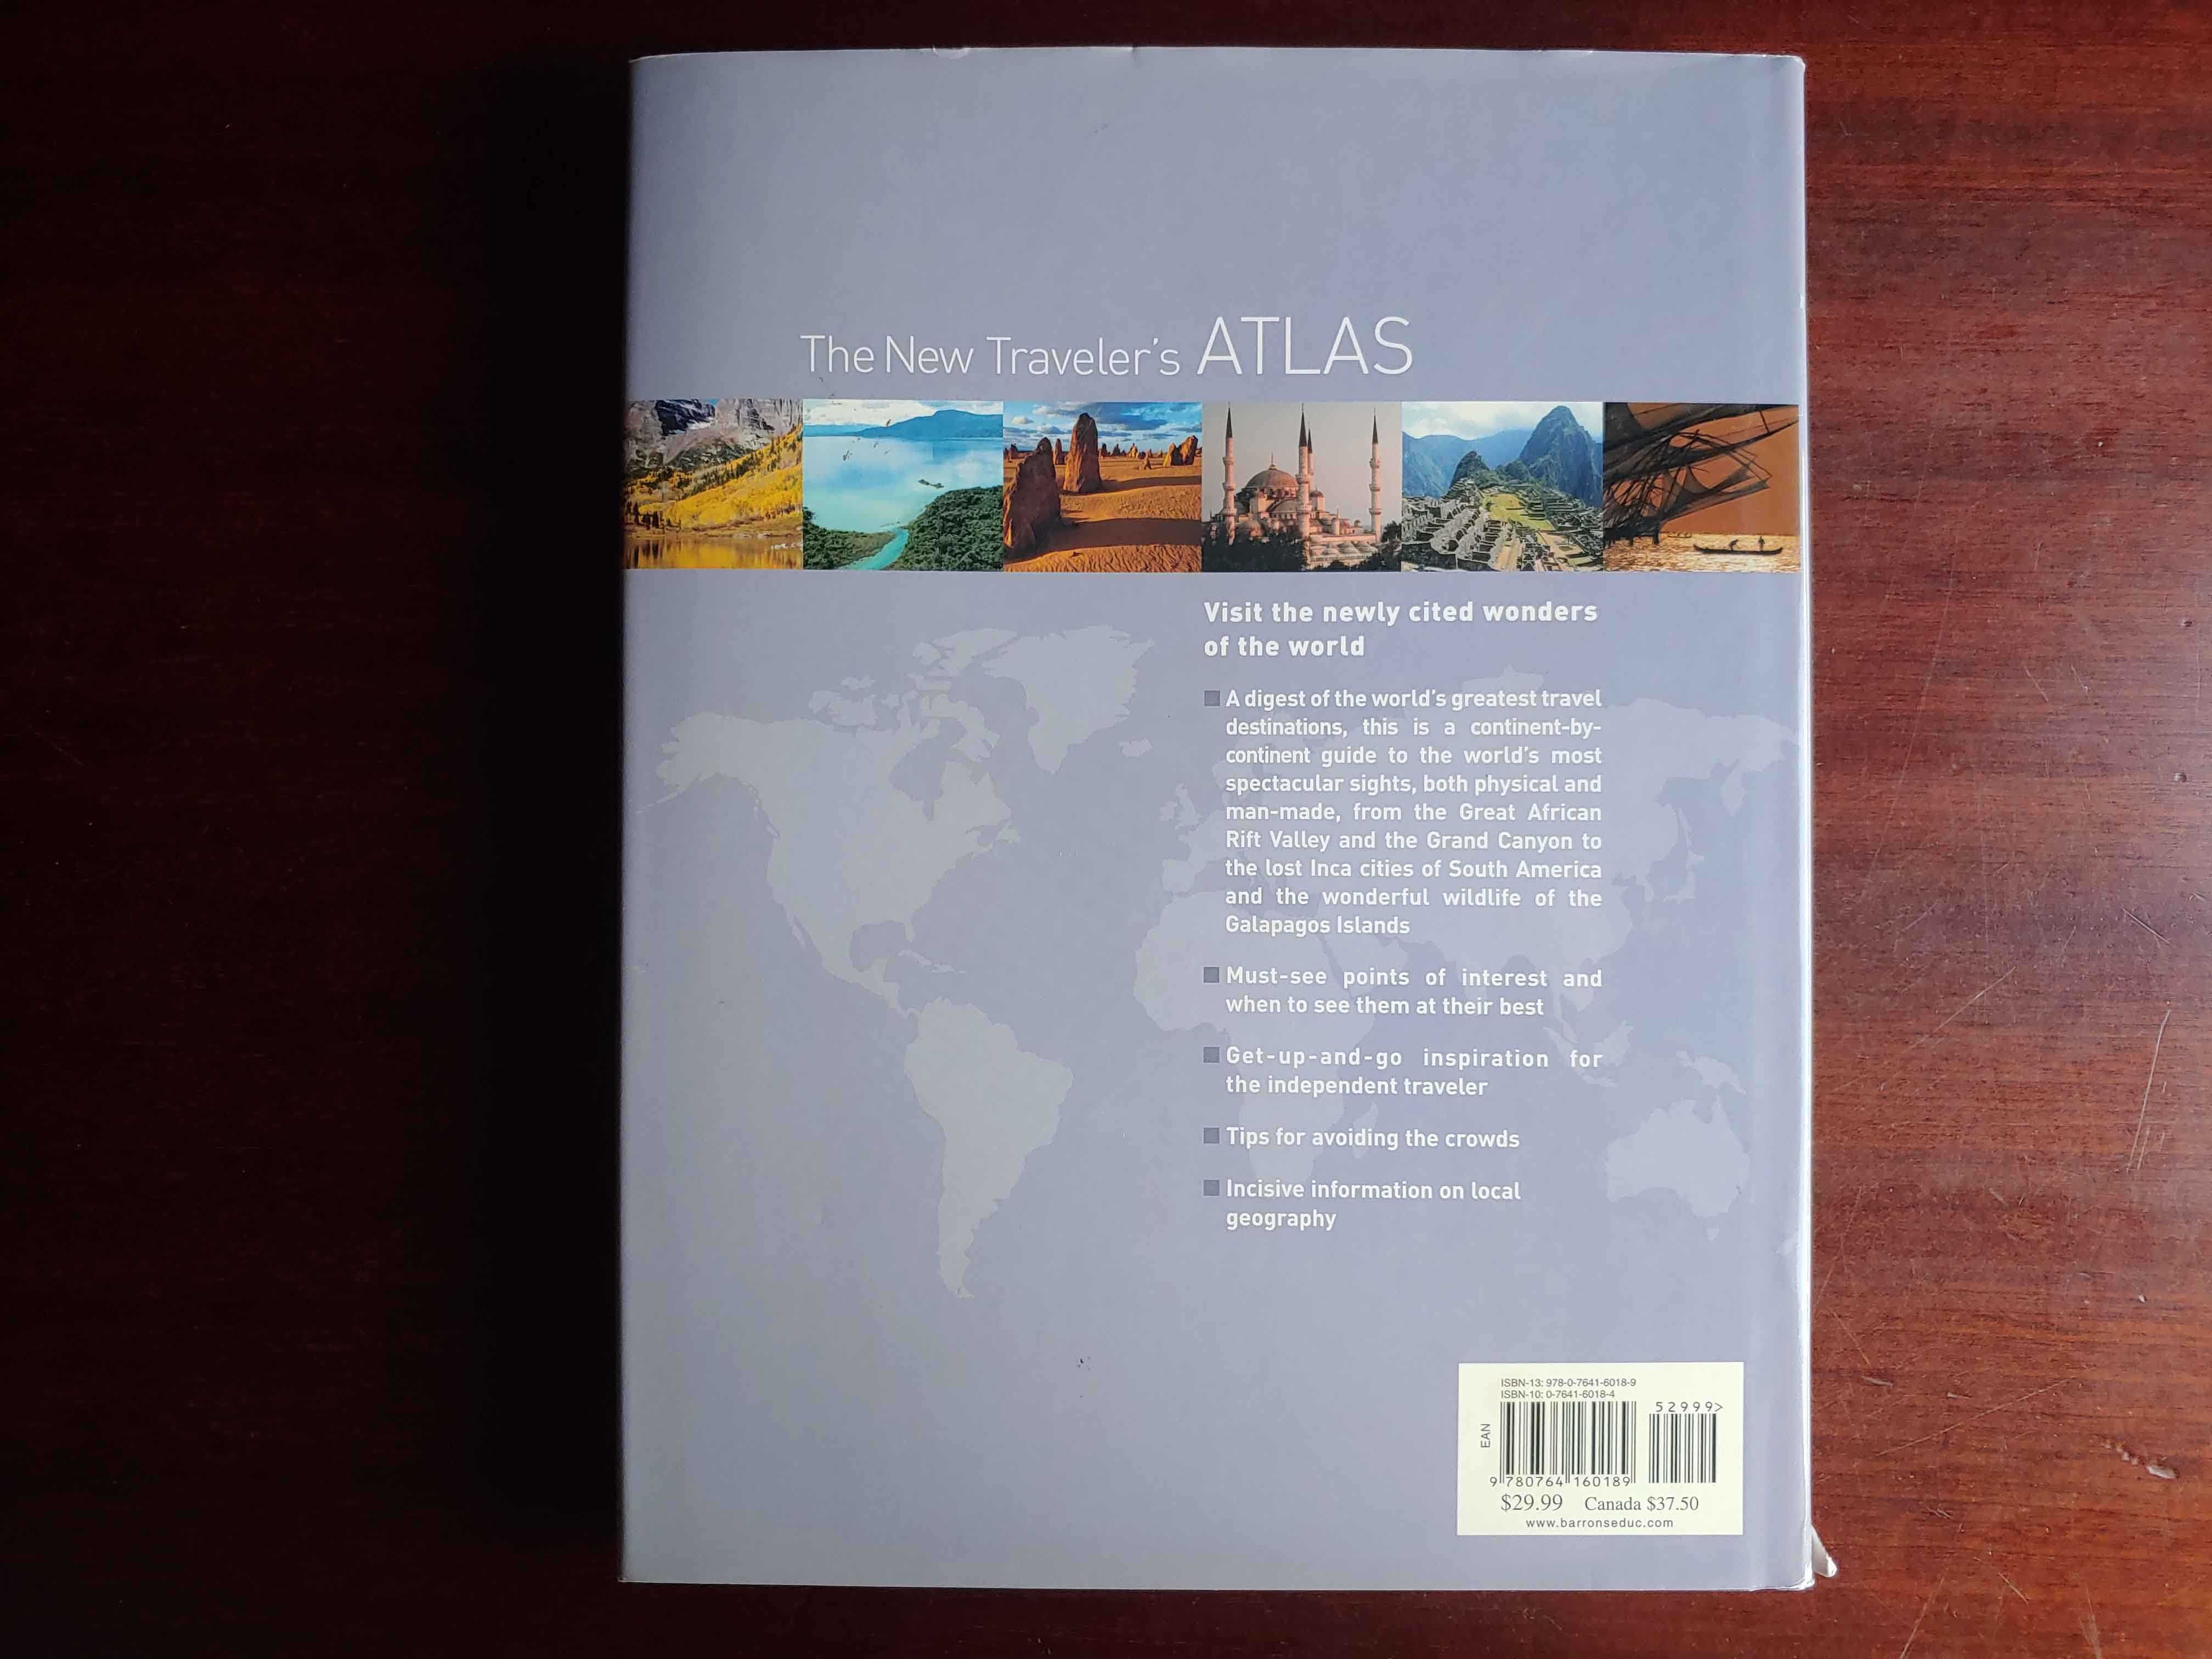 The New Traveler's ATLAS - A global guide to the places you must see